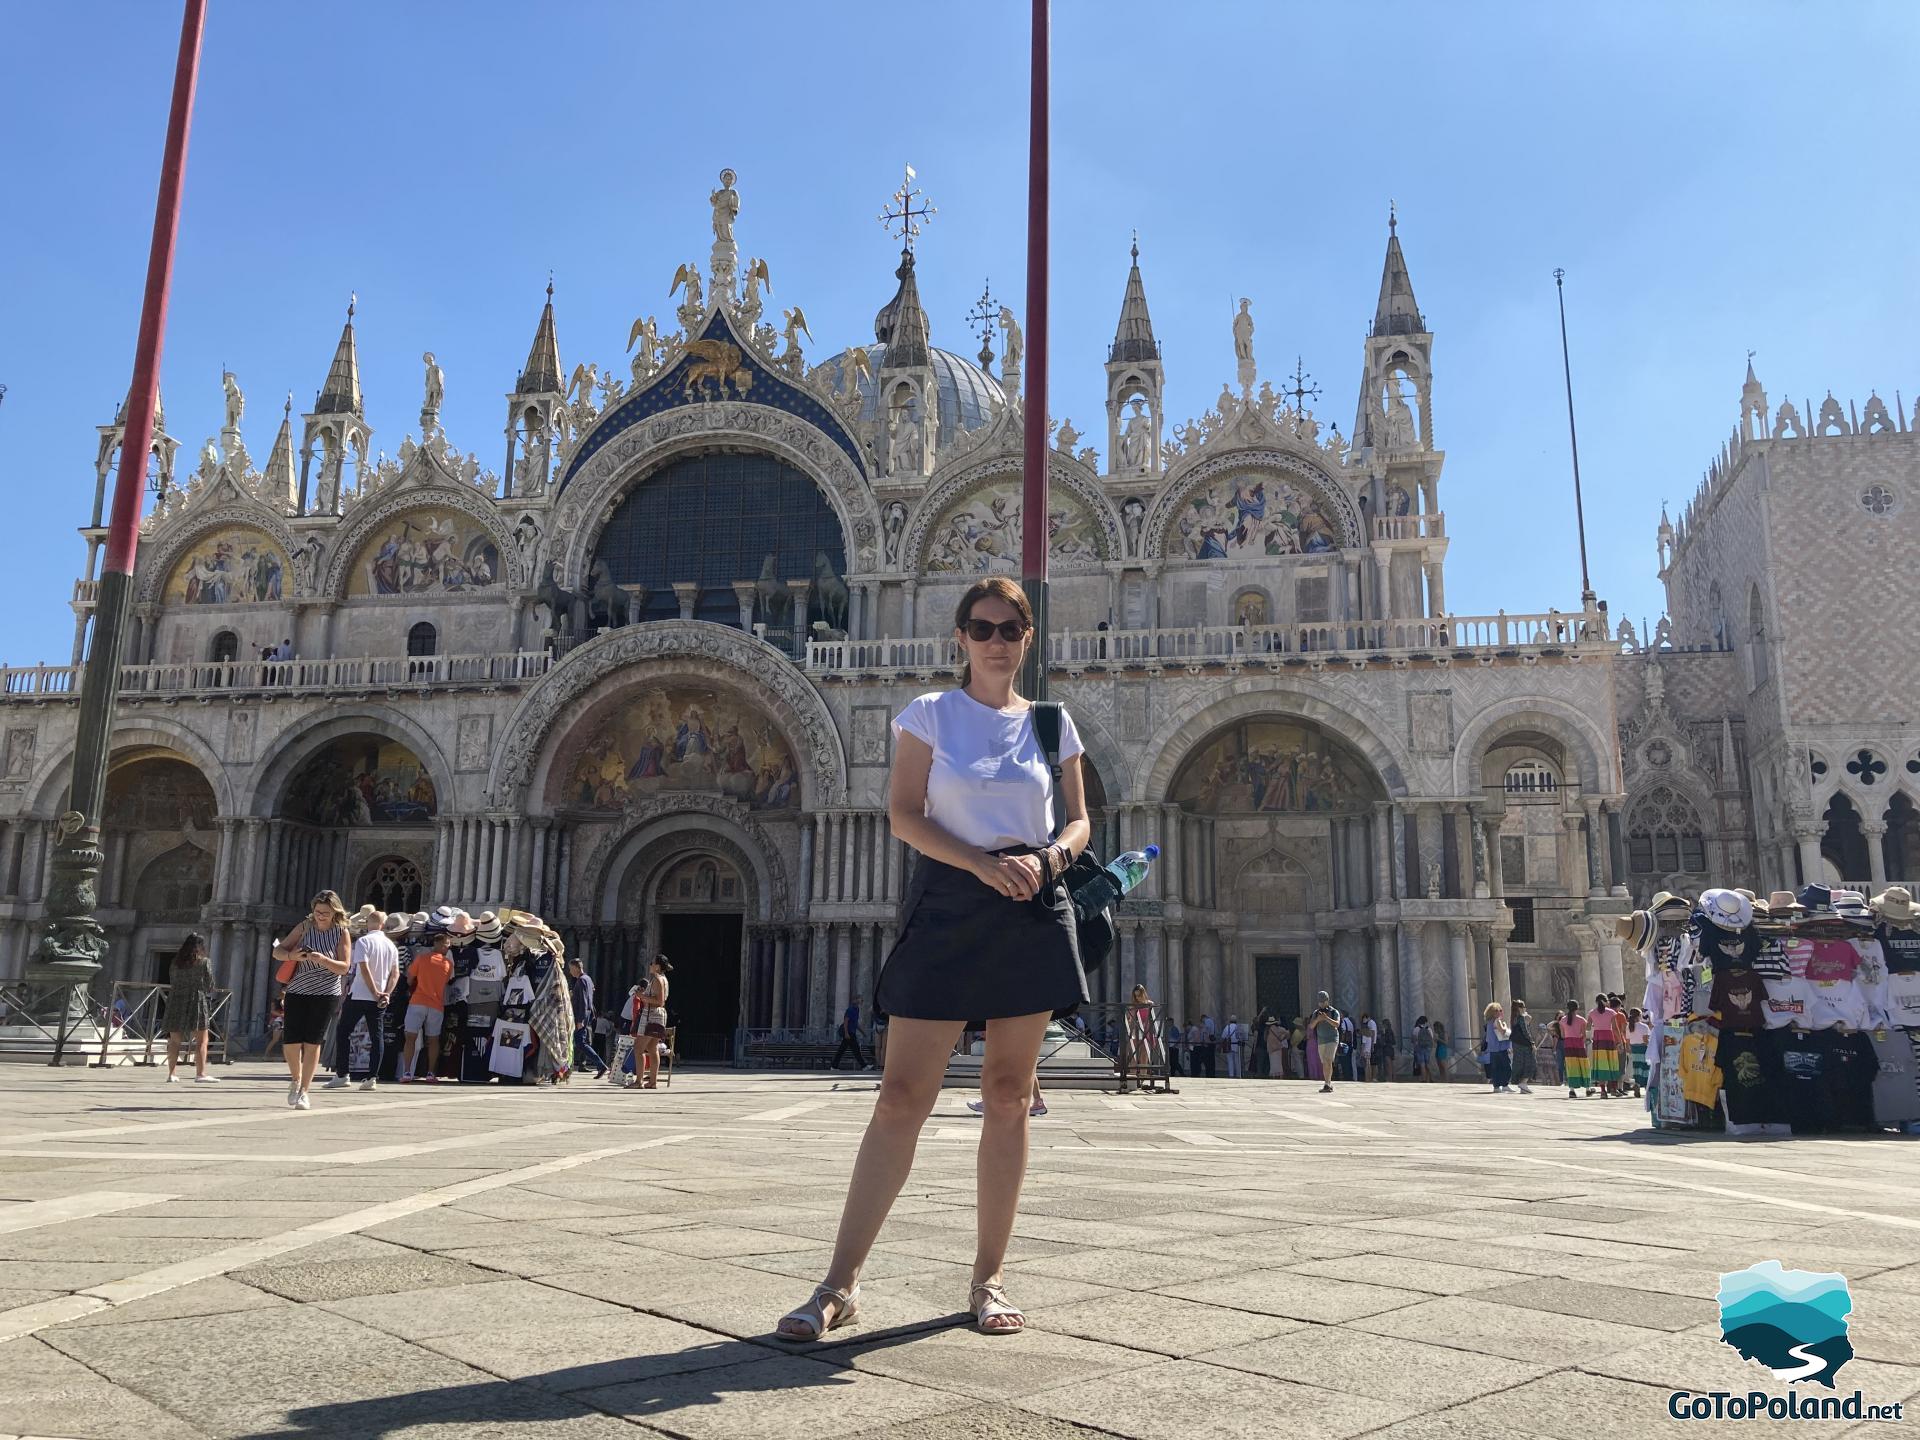 a woman is standing in front of Saint Marks Basilica, a magnificent church in Venice